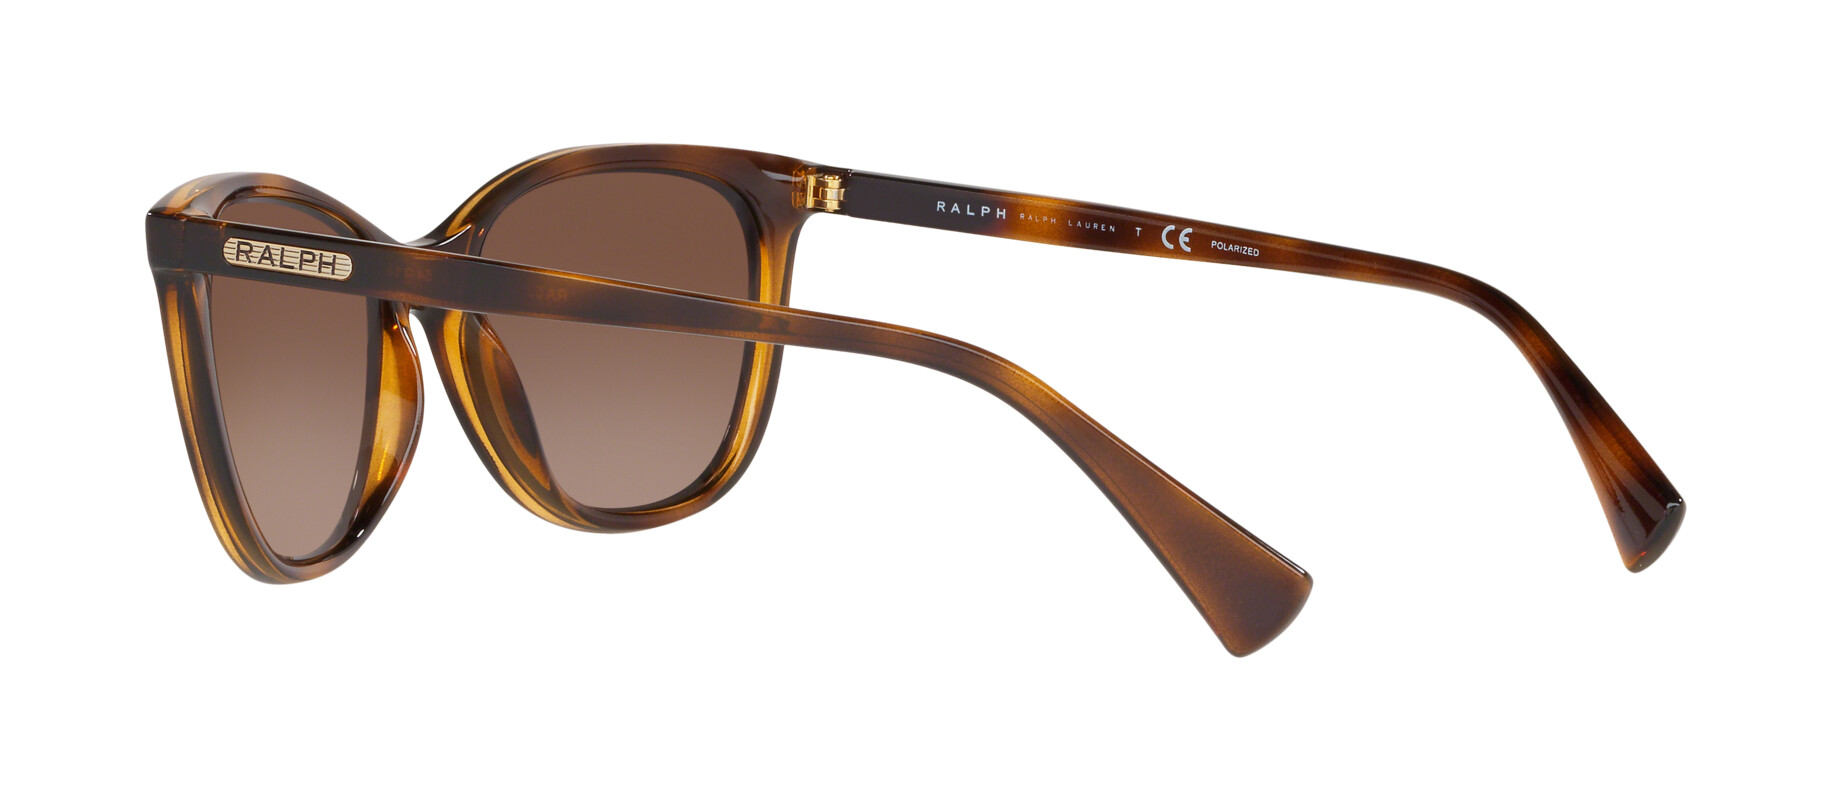 [products.image.angle_right02] Ralph Lauren 0RA5259 5003T5 Sonnenbrille